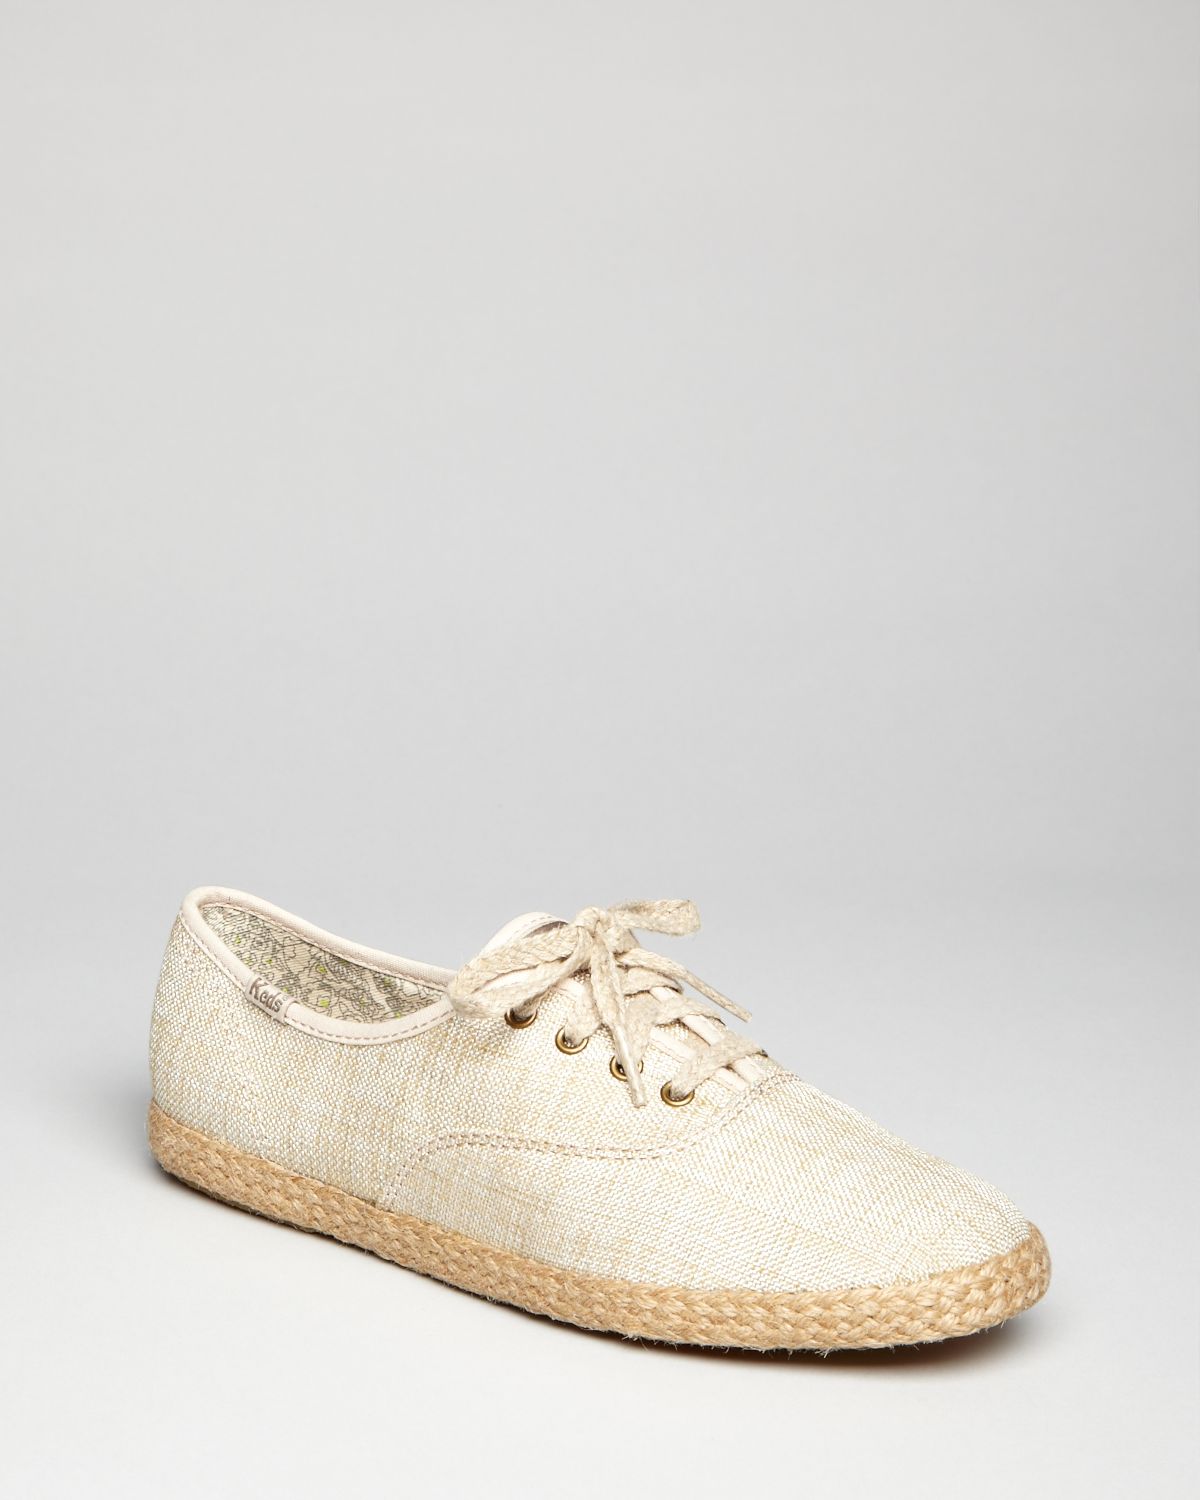 Lyst - Keds Lace Up Sneakers Champion Jute Metallic Linen in Natural